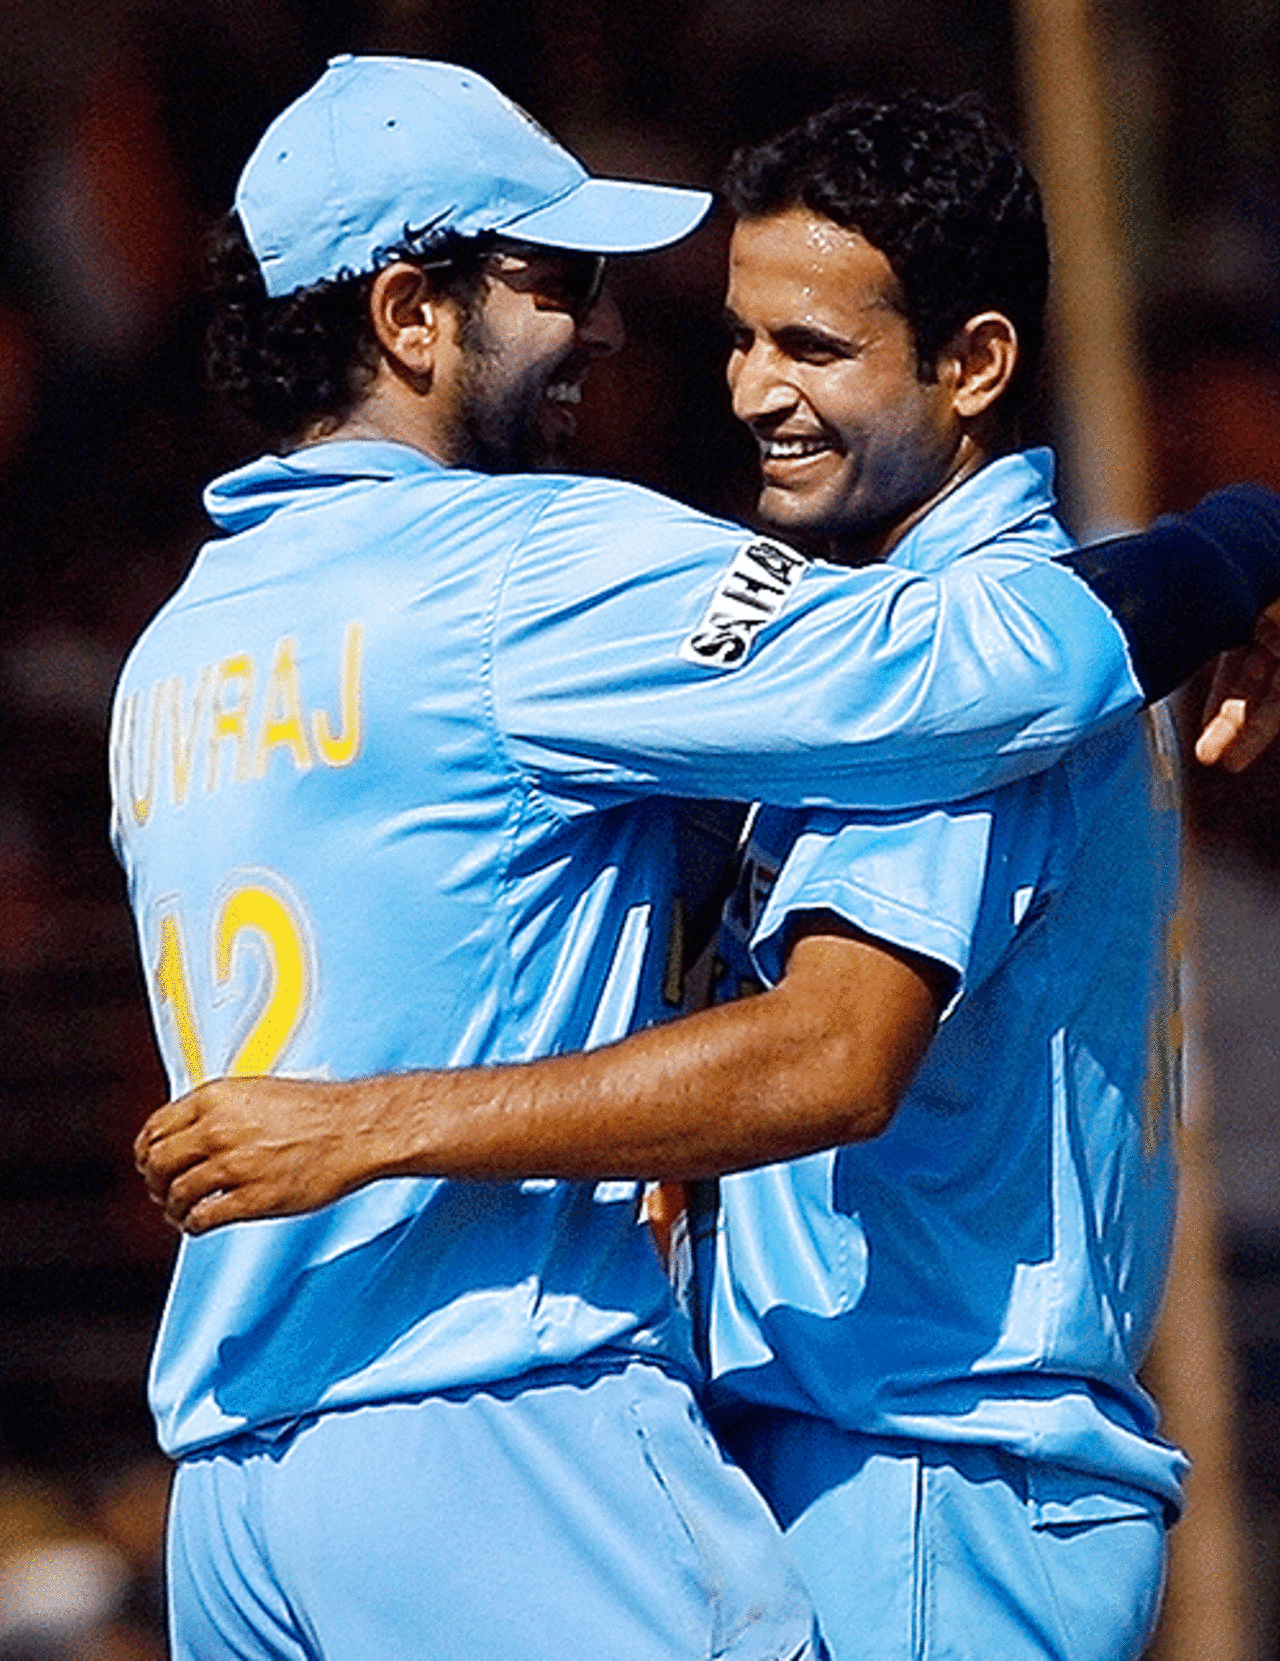 Yuvraj Singh and Irfan Pathan combined to remove Devon Smith, India v West Indies, 4th ODI, Vadodara, January 31, 2007